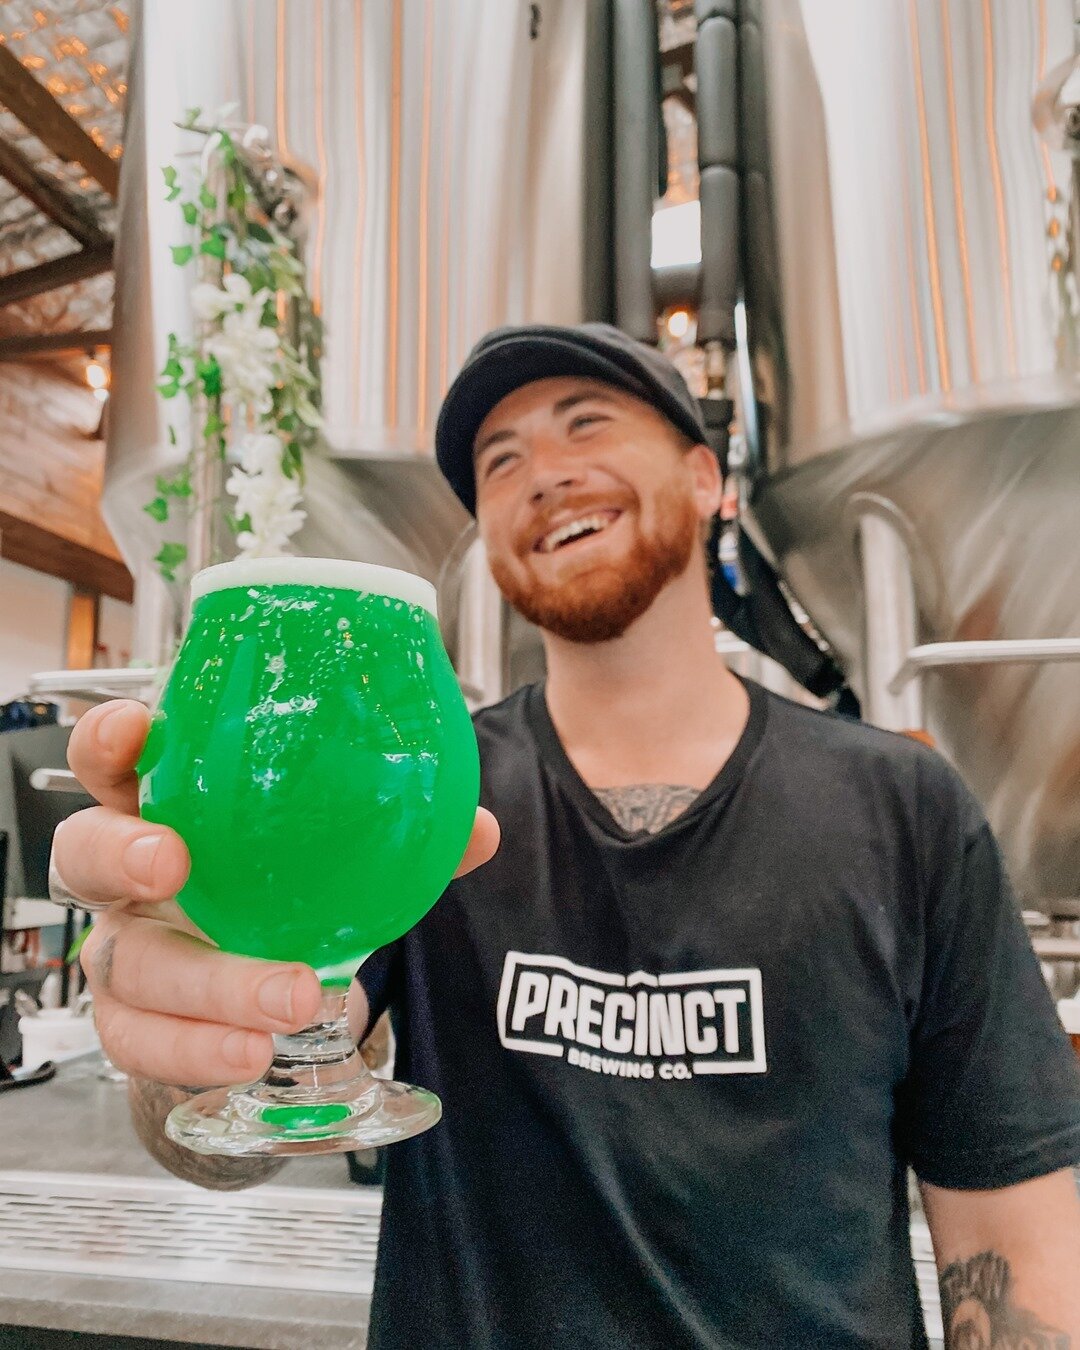 🍀HAPPY ST. PATRICK&rsquo;S DAY🍀⠀⠀⠀⠀⠀⠀⠀⠀⠀
Come in and try our cracker of a green lager we released just for you!!